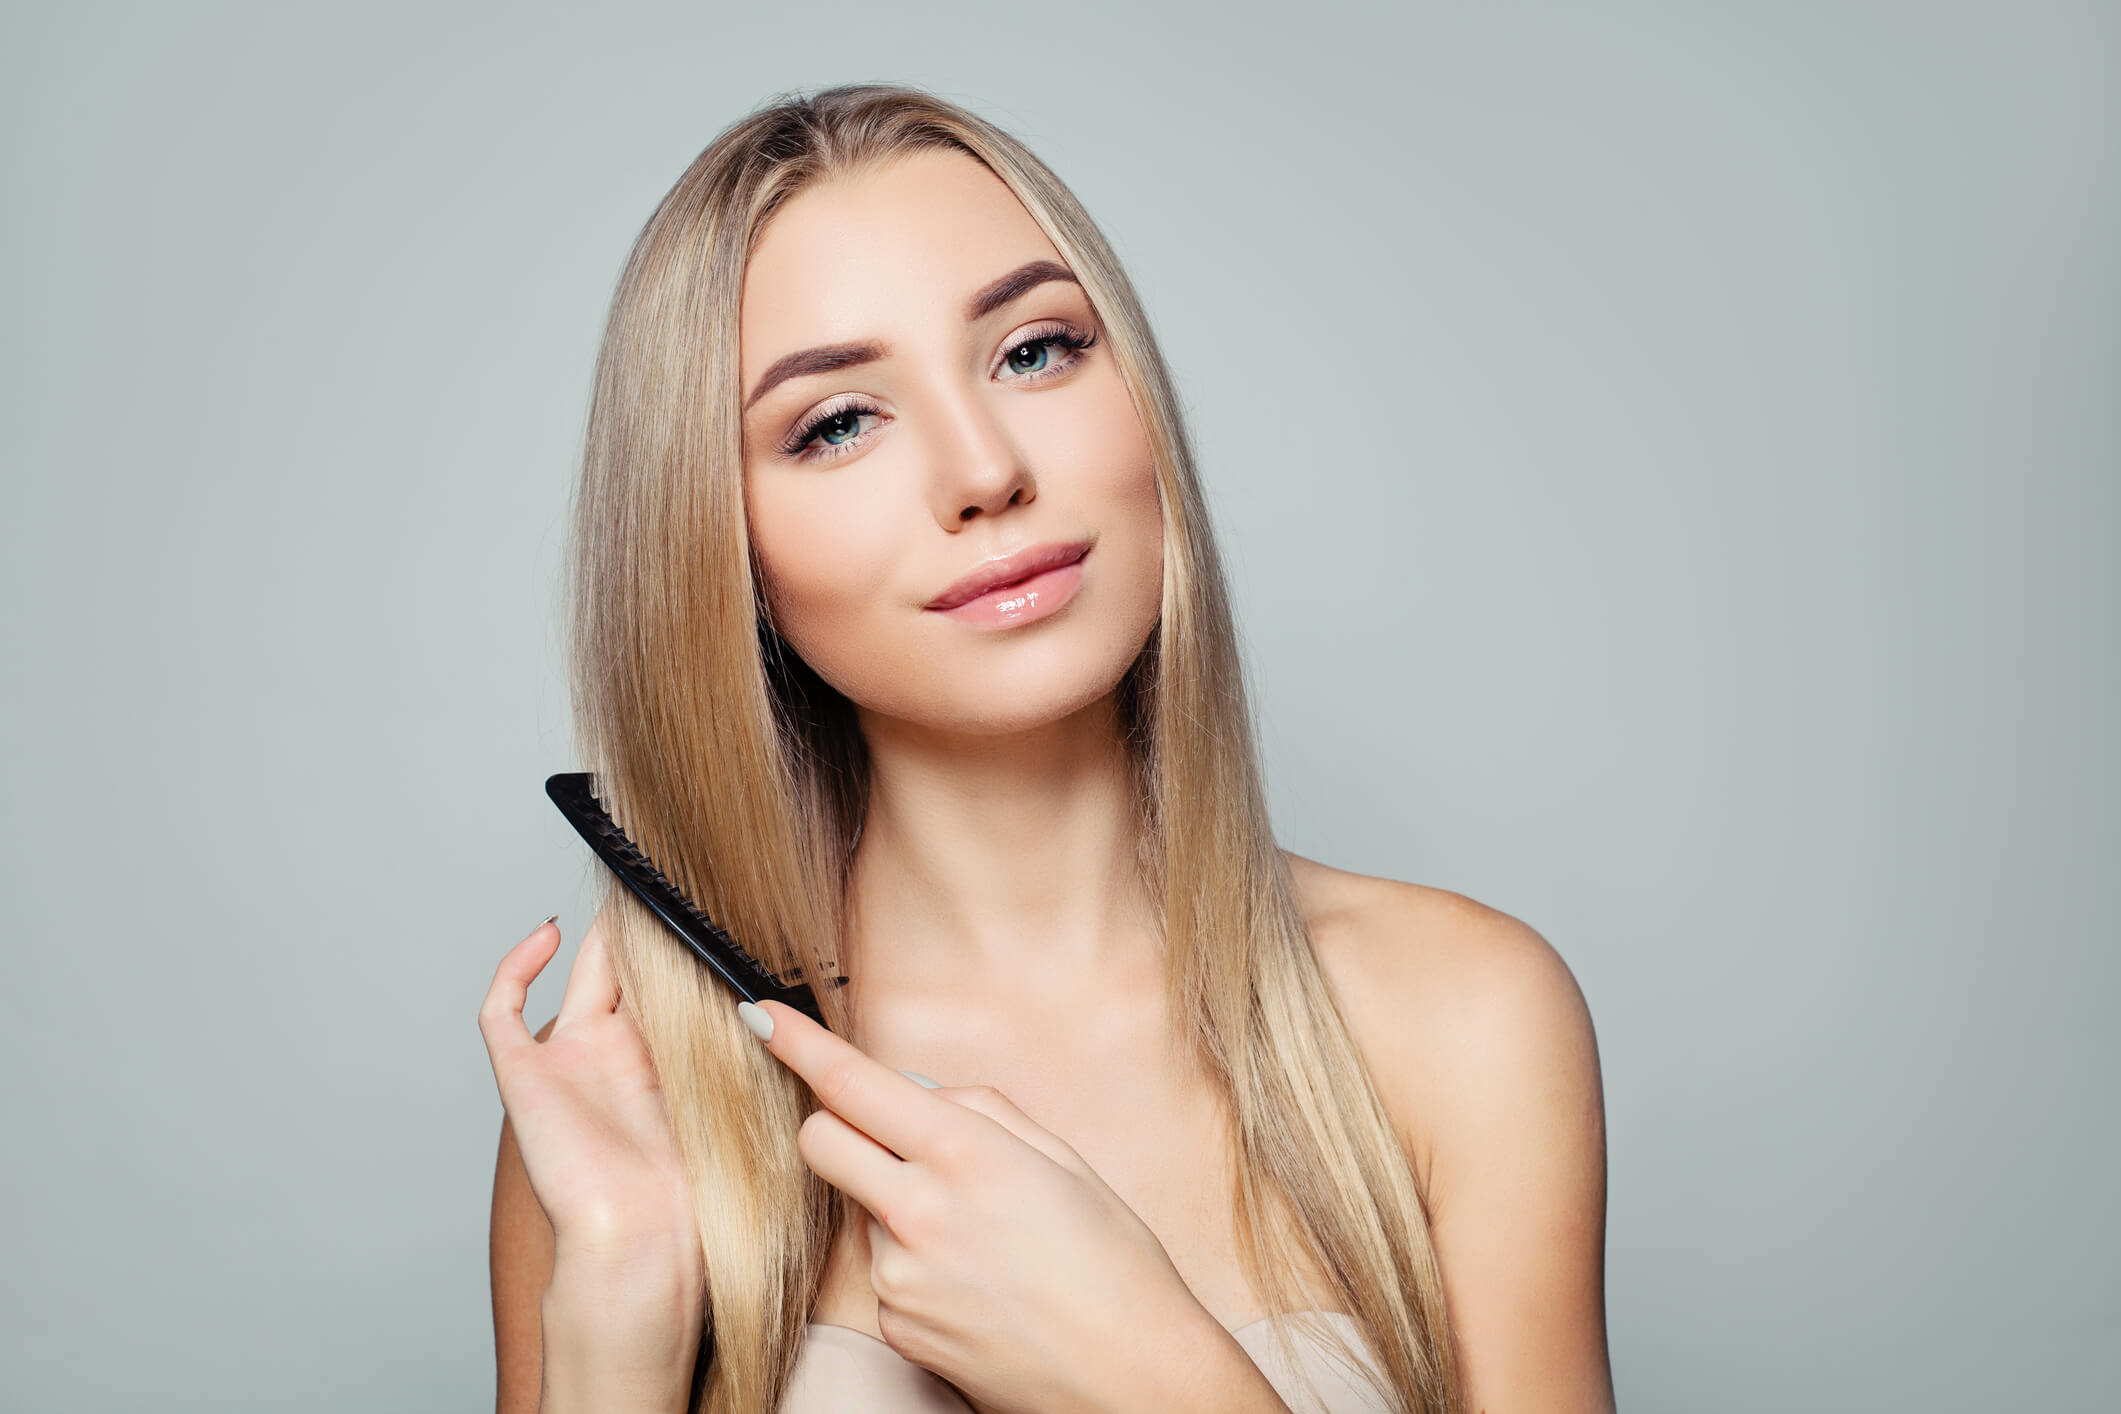 beautiful-blonde-woman-long-healthy-straight-hair-combing-hair-haircare-concept-girl-combs-hair-beautiful-blonde-woman-image